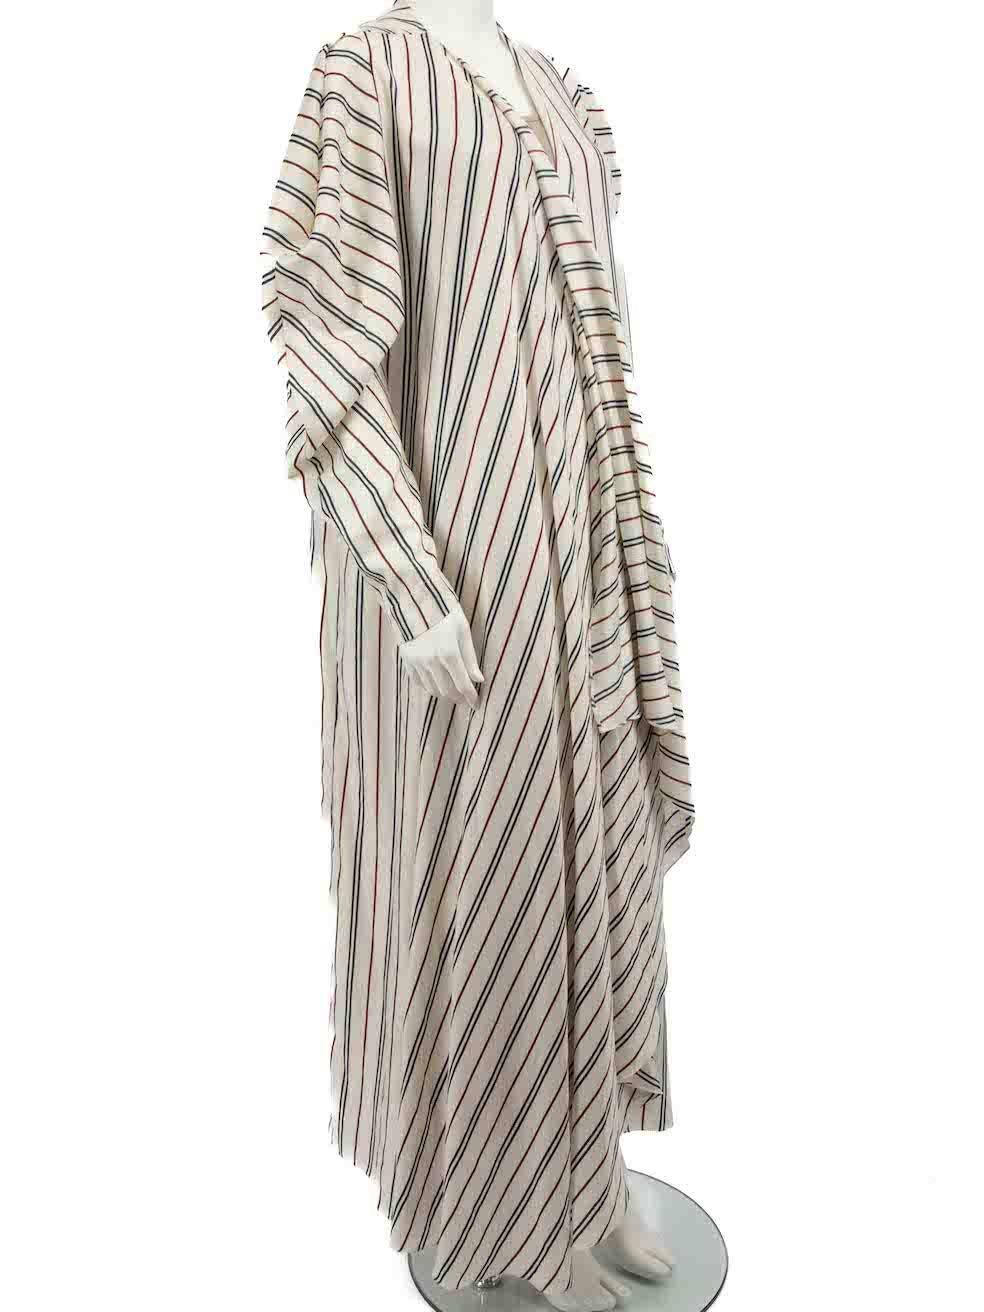 CONDITION is Very good. Hardly any visible wear to jacket is evident on this used A.W.A.K.E. MODE designer resale item.
 
Details
White
Silk
Duster coat
Long length
Striped pattern
Open front
 
Made in United Kingdom
 
Composition
40% Polyester, 35%